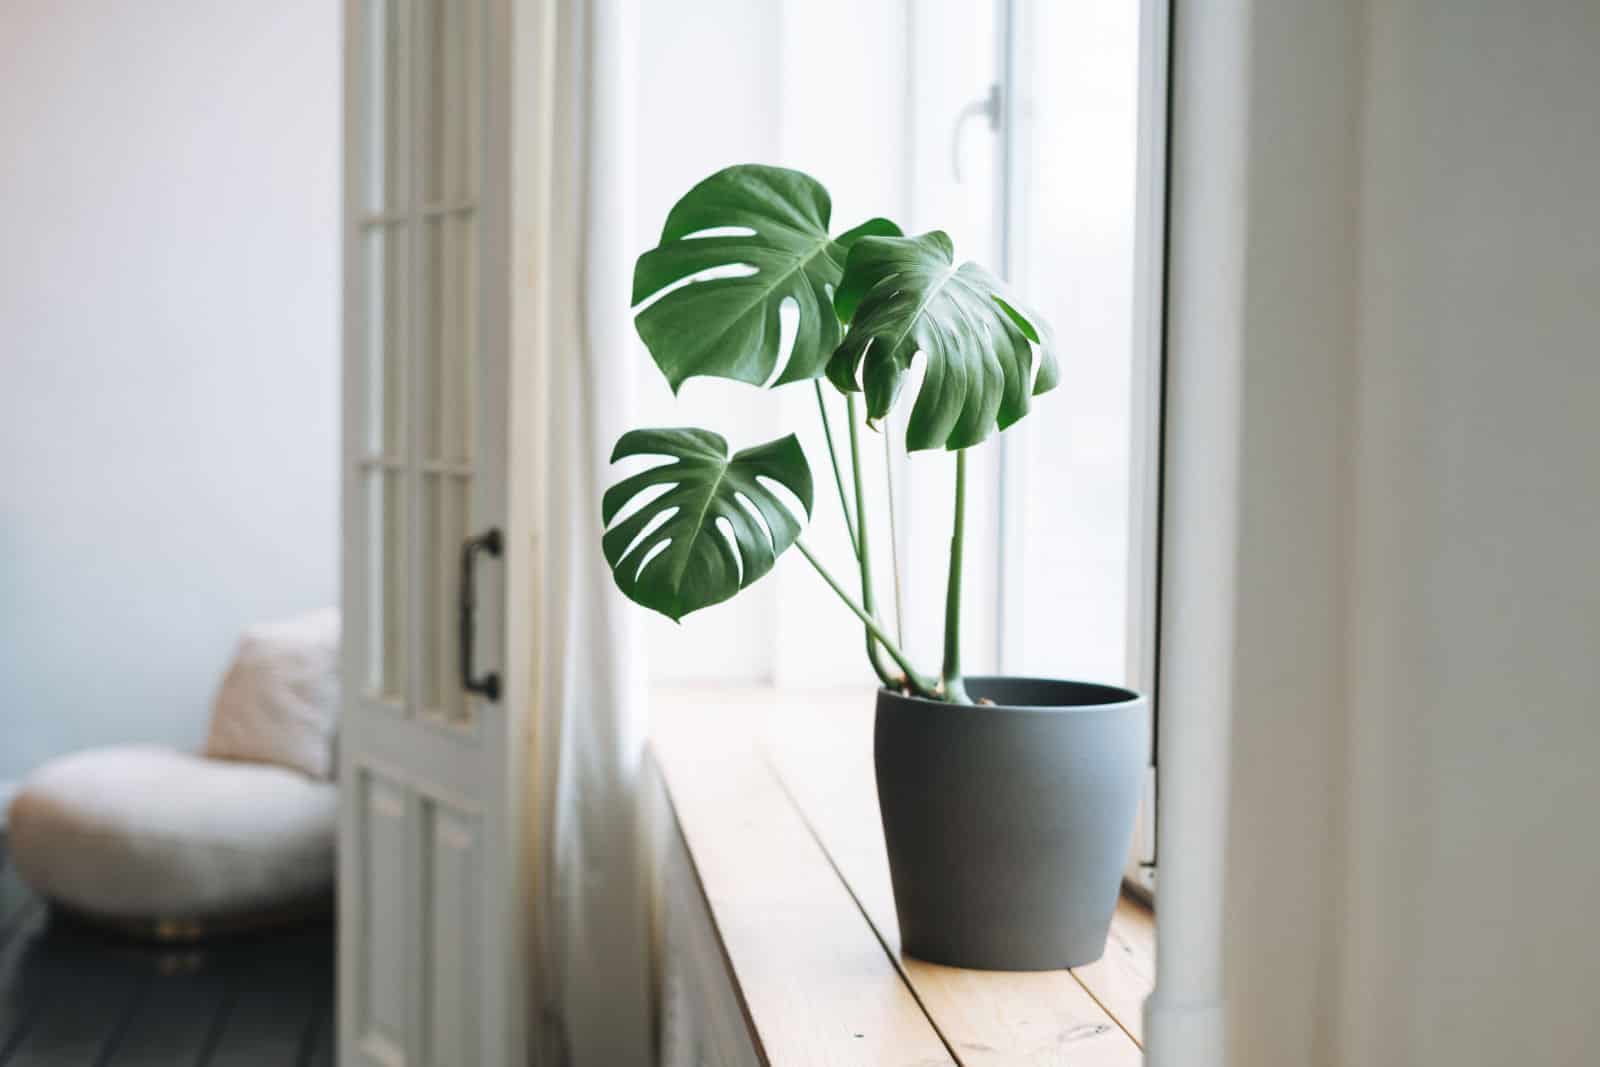 Interior details, a monstera flower in gray pot on the windowsill